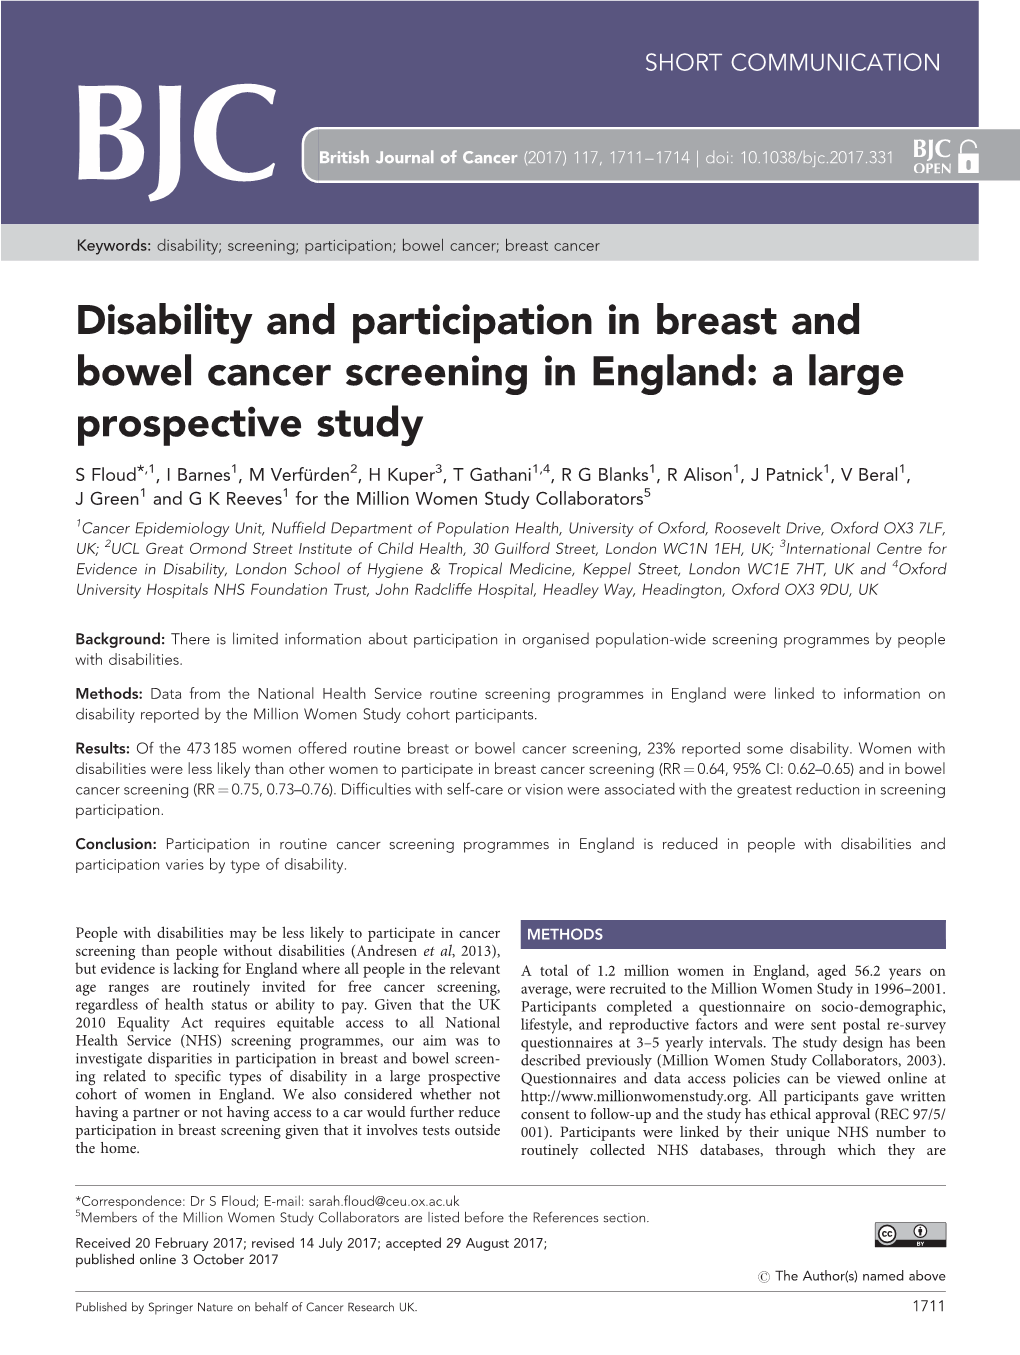 Disability and Participation in Breast and Bowel Cancer Screening in England: a Large Prospective Study